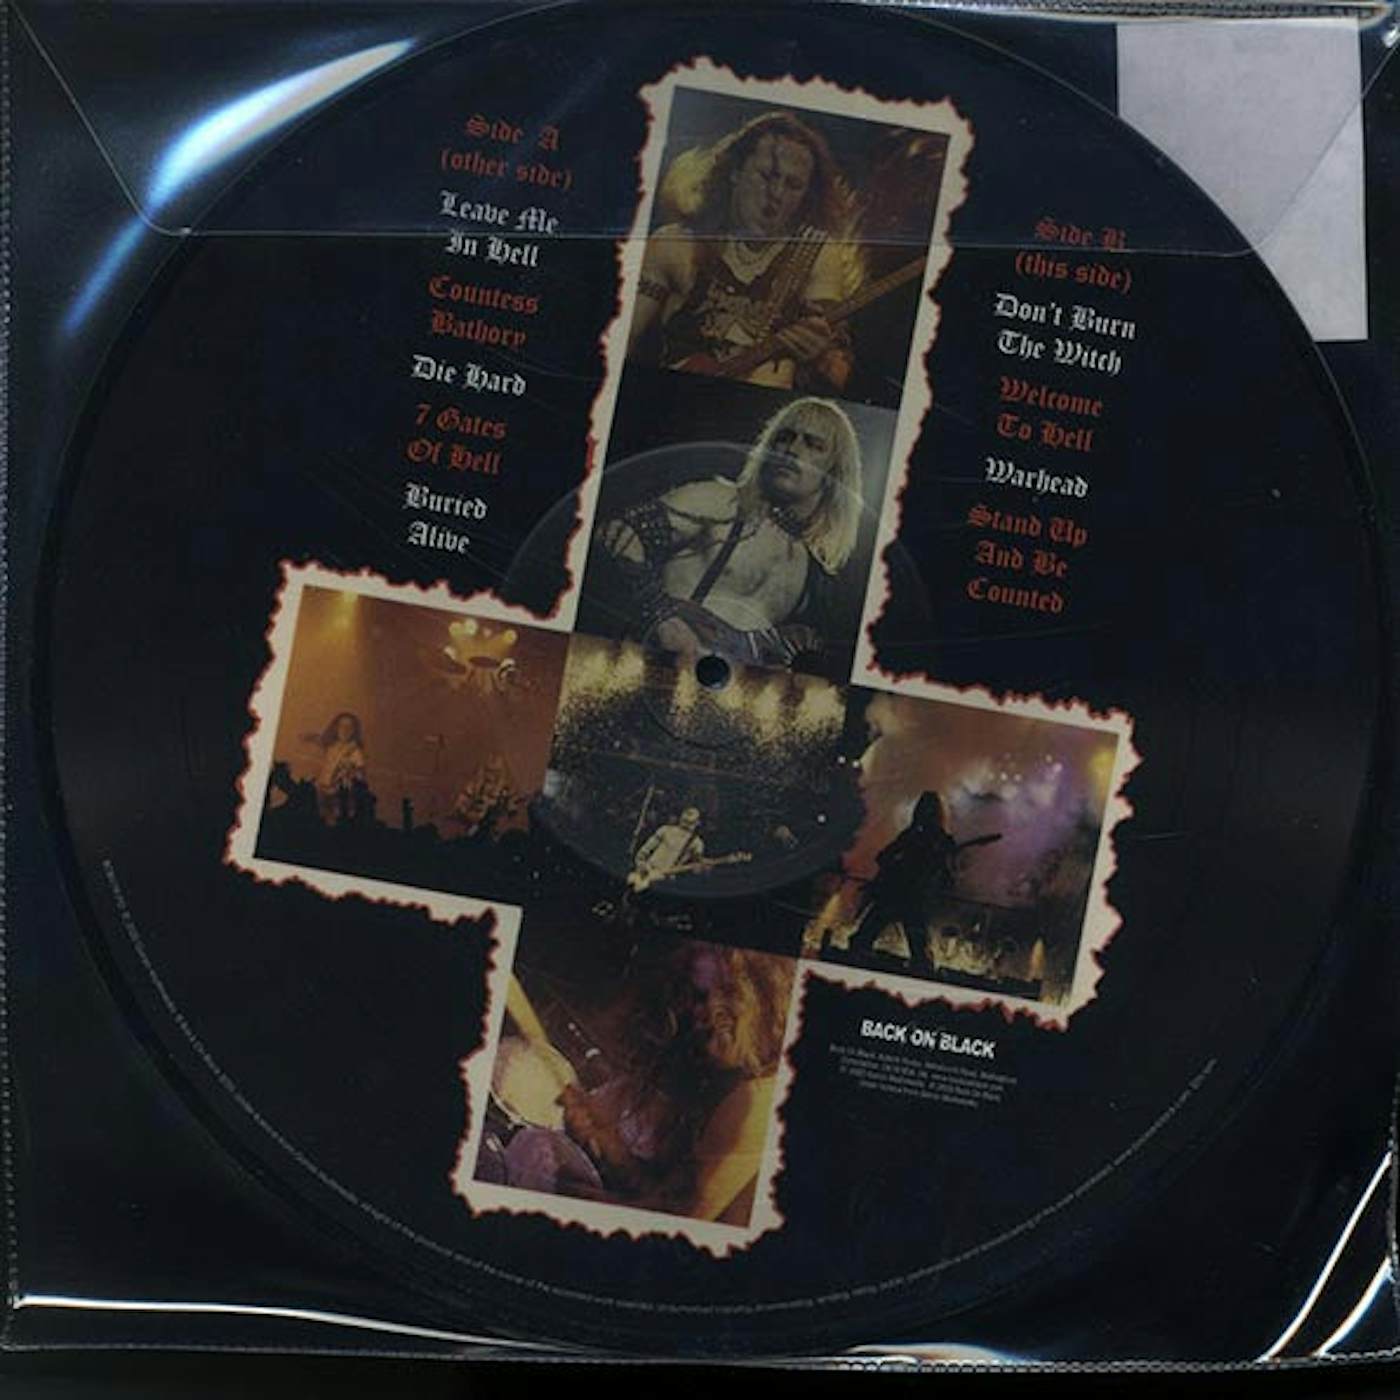 Venom  LP -  The 7th Date Of Hell: Live At Hammersmith Odeon 1984 (ltd. ed.) (picture disc) (Vinyl)